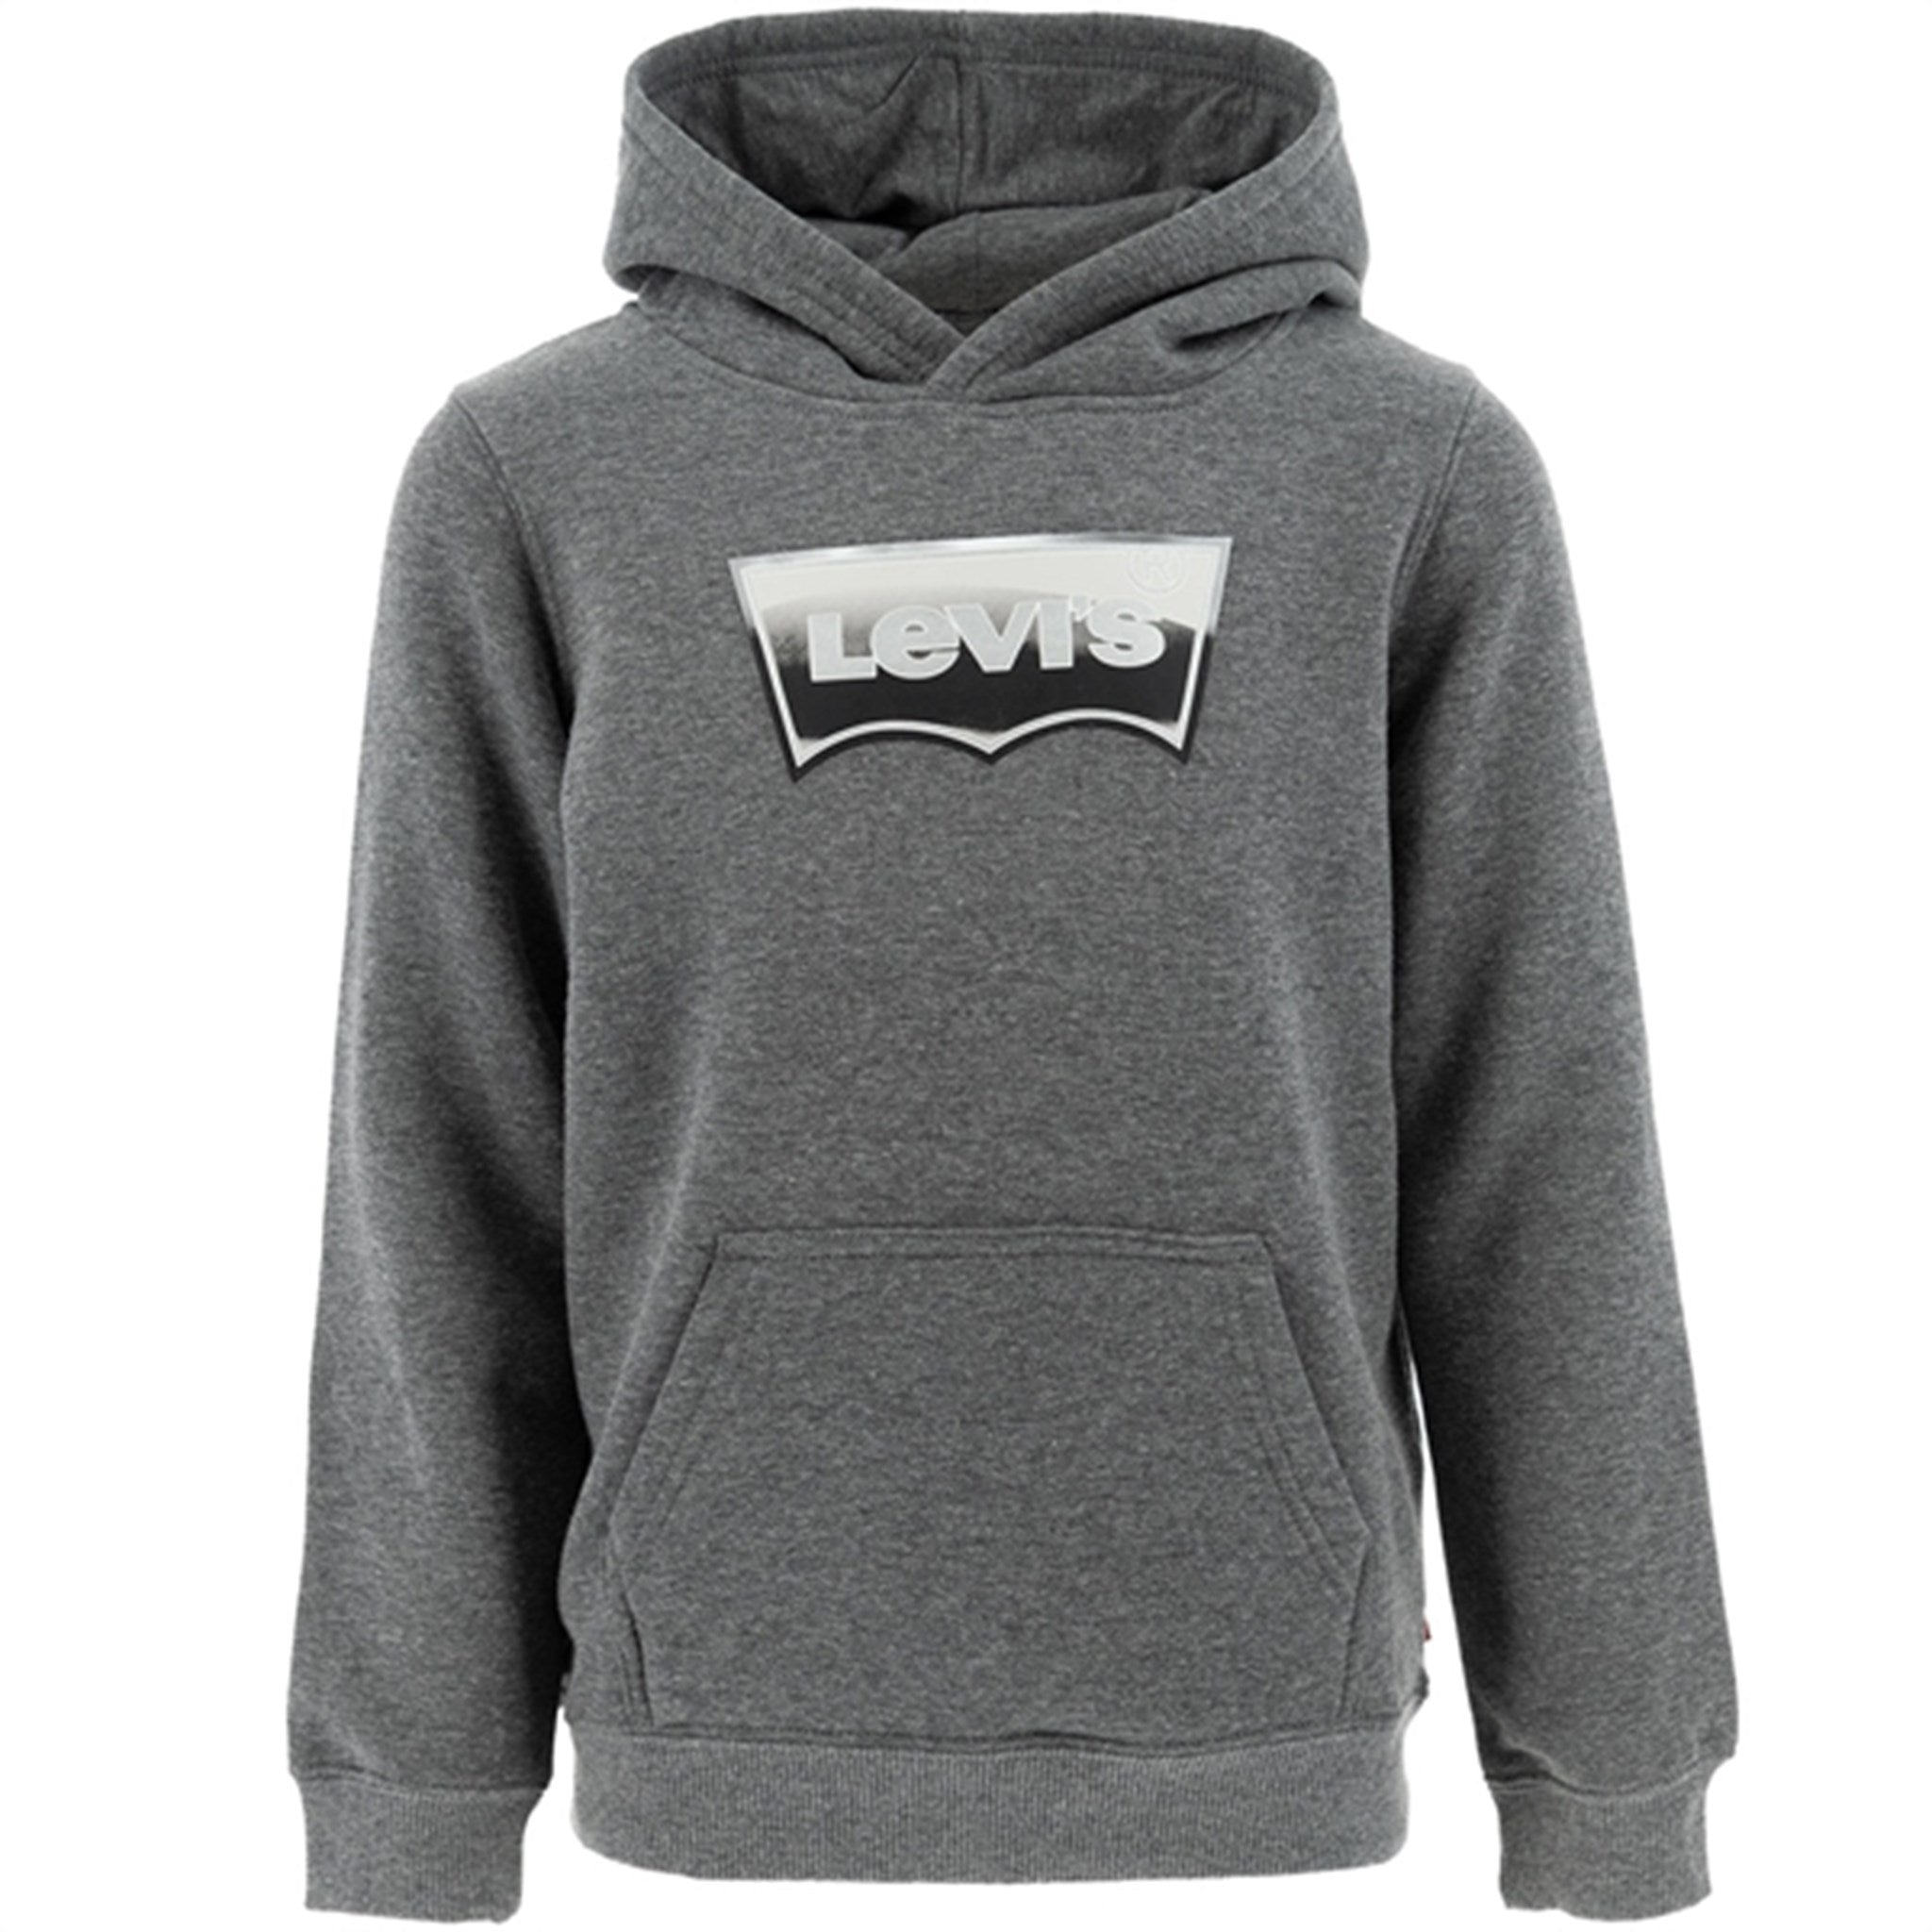 Levi's Metallic Batwing Pullover Hoodie Charcoal Heather